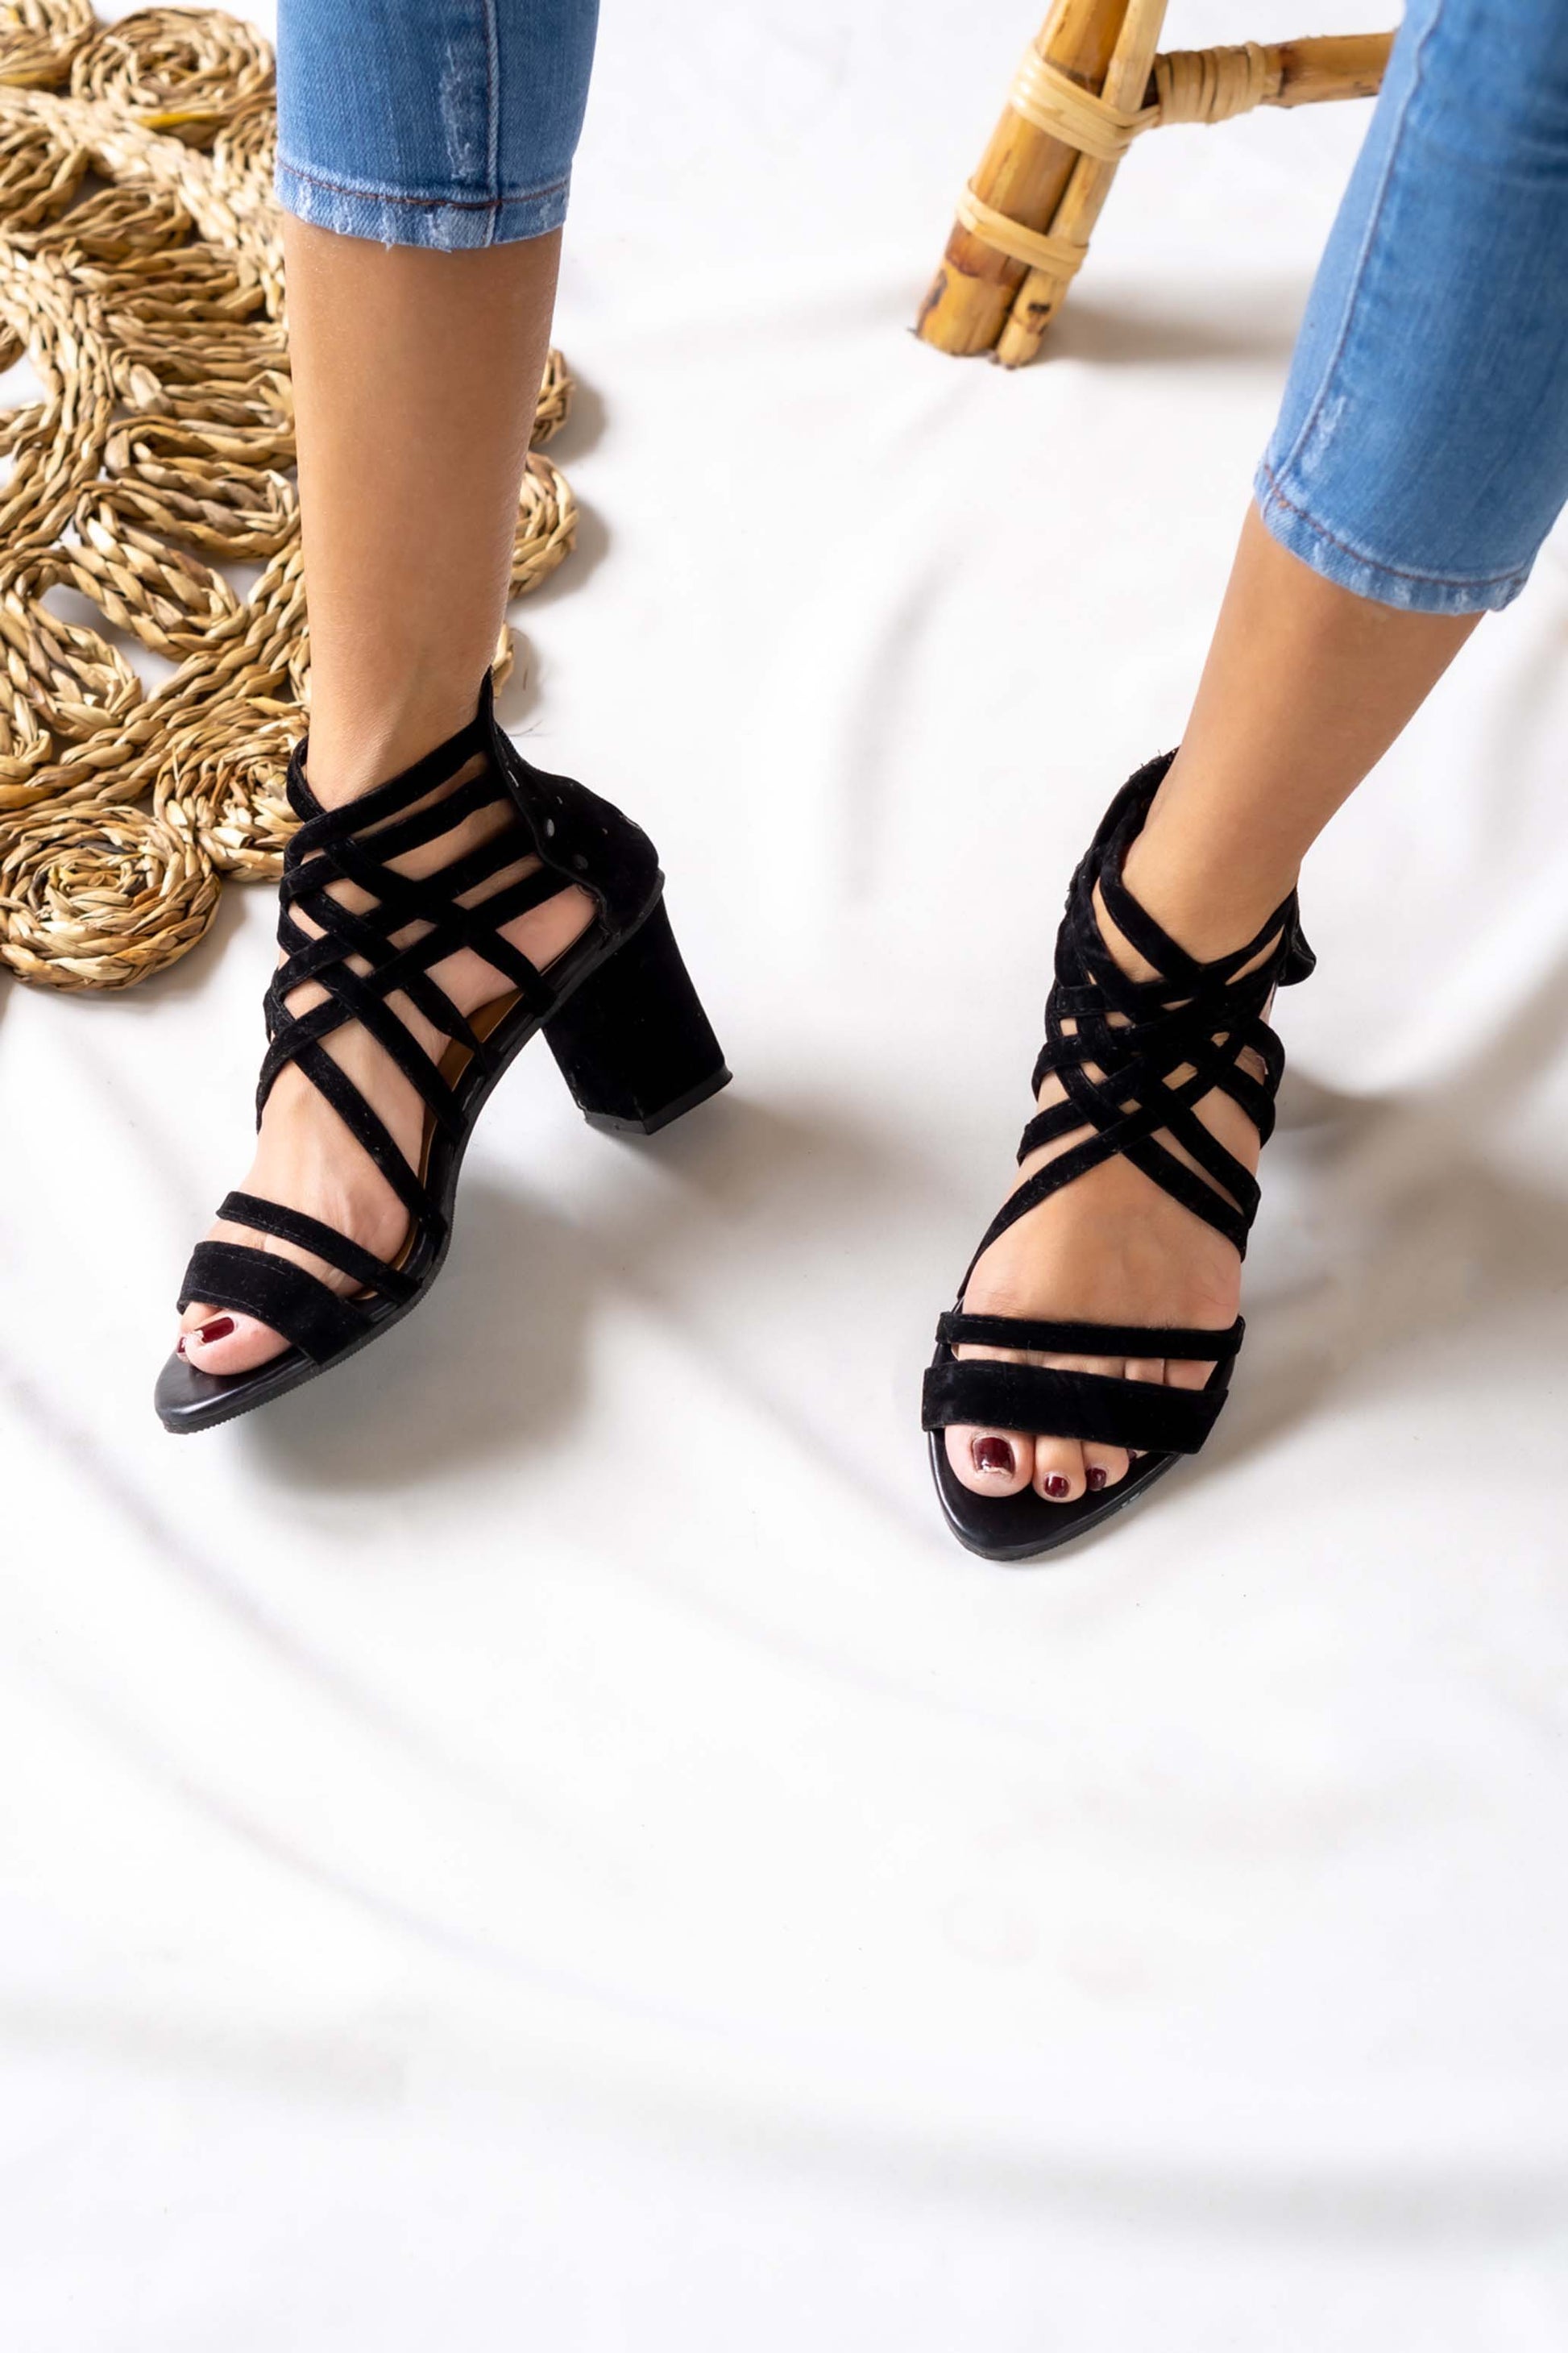 Strappy and bold, this gladiator-style box heel adds a touch of edgy elegance to any look